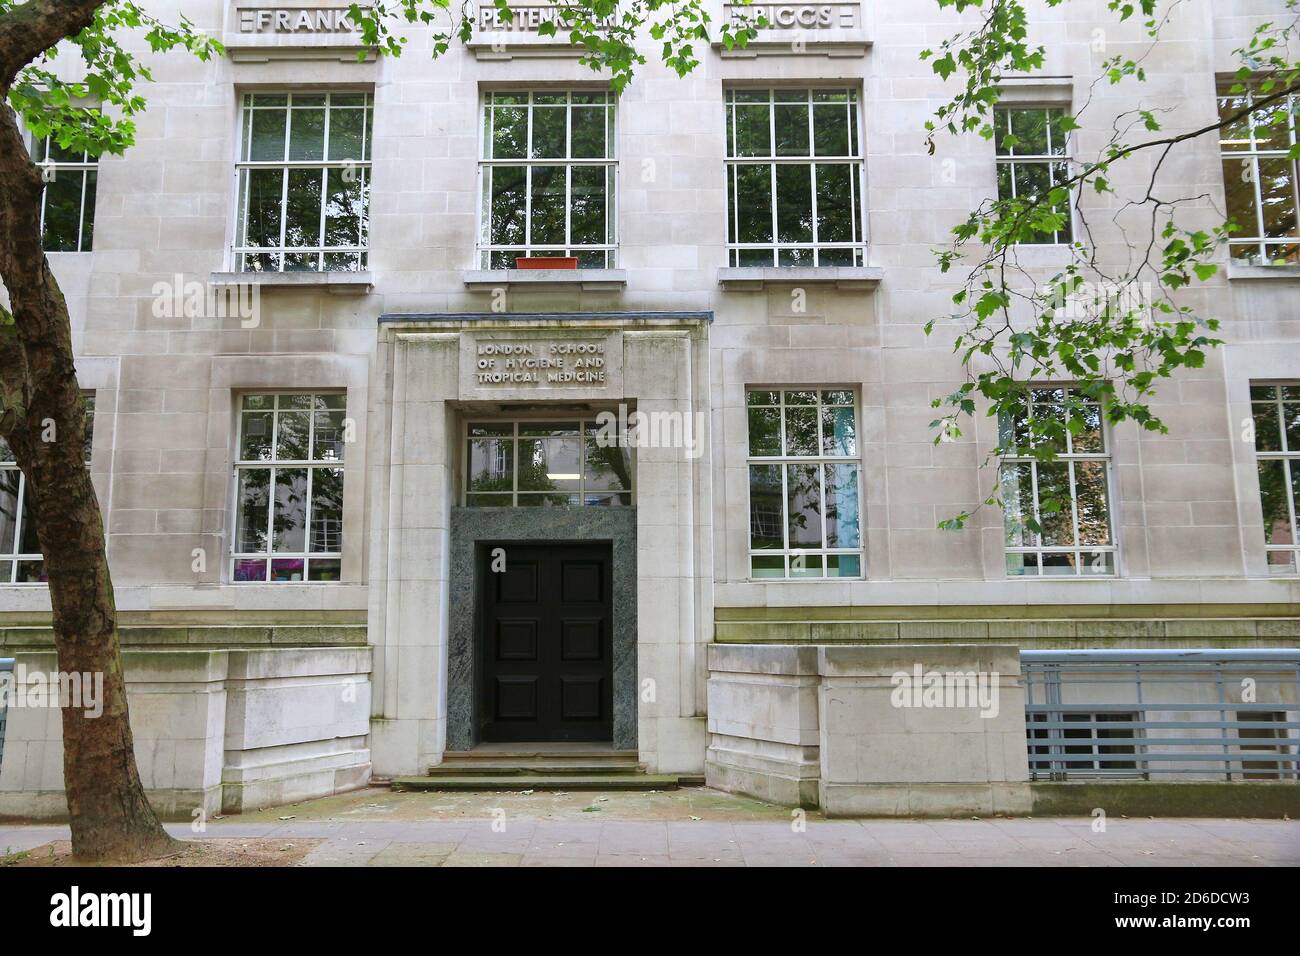 London School of Hygiene and Tropical Medicine. Public research university founded in 1899. Part of University of London. Stock Photo